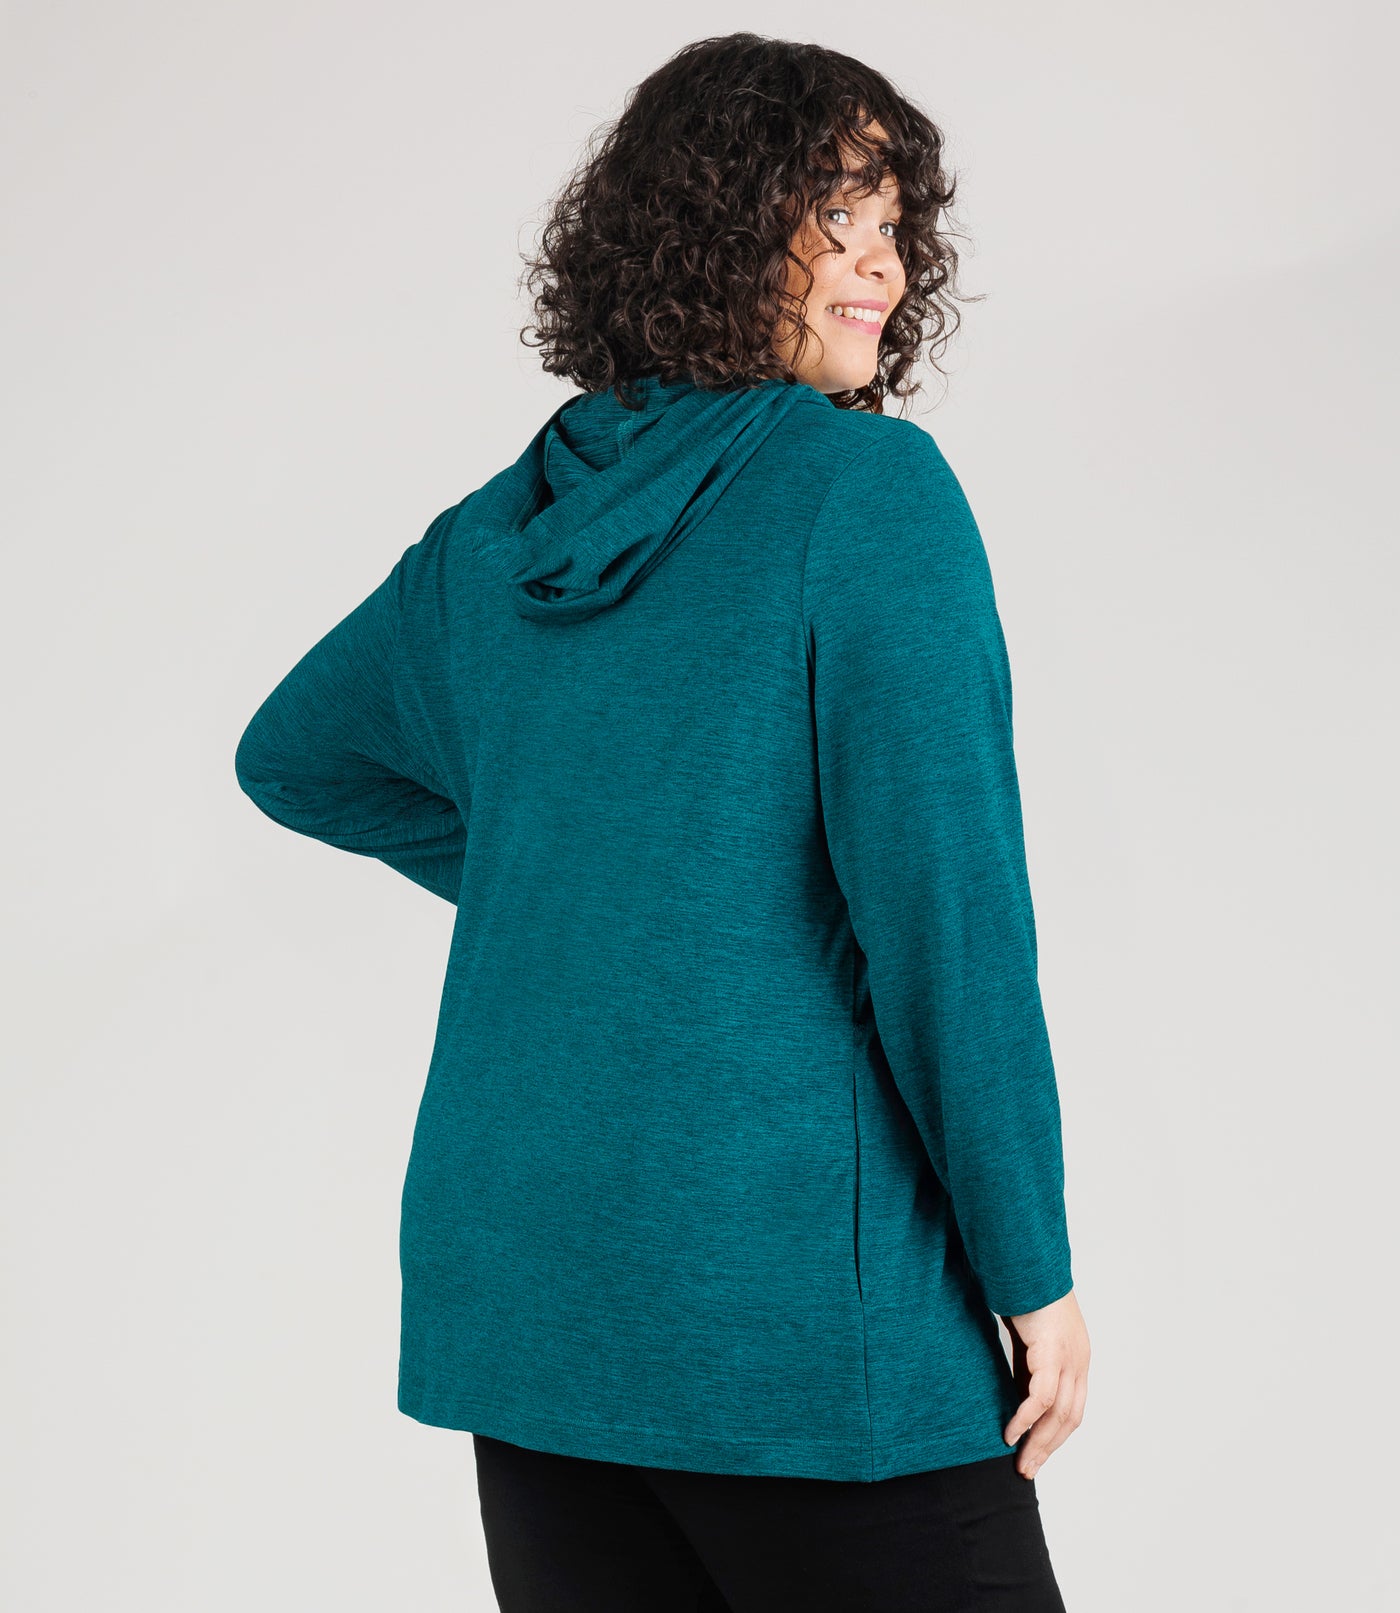 JunoActive model, facing back, wearing SoftSupreme Pocketed Hoodie in color Heather Dark Teal. Model's left hand is on left hip and right arm dropped by her side.